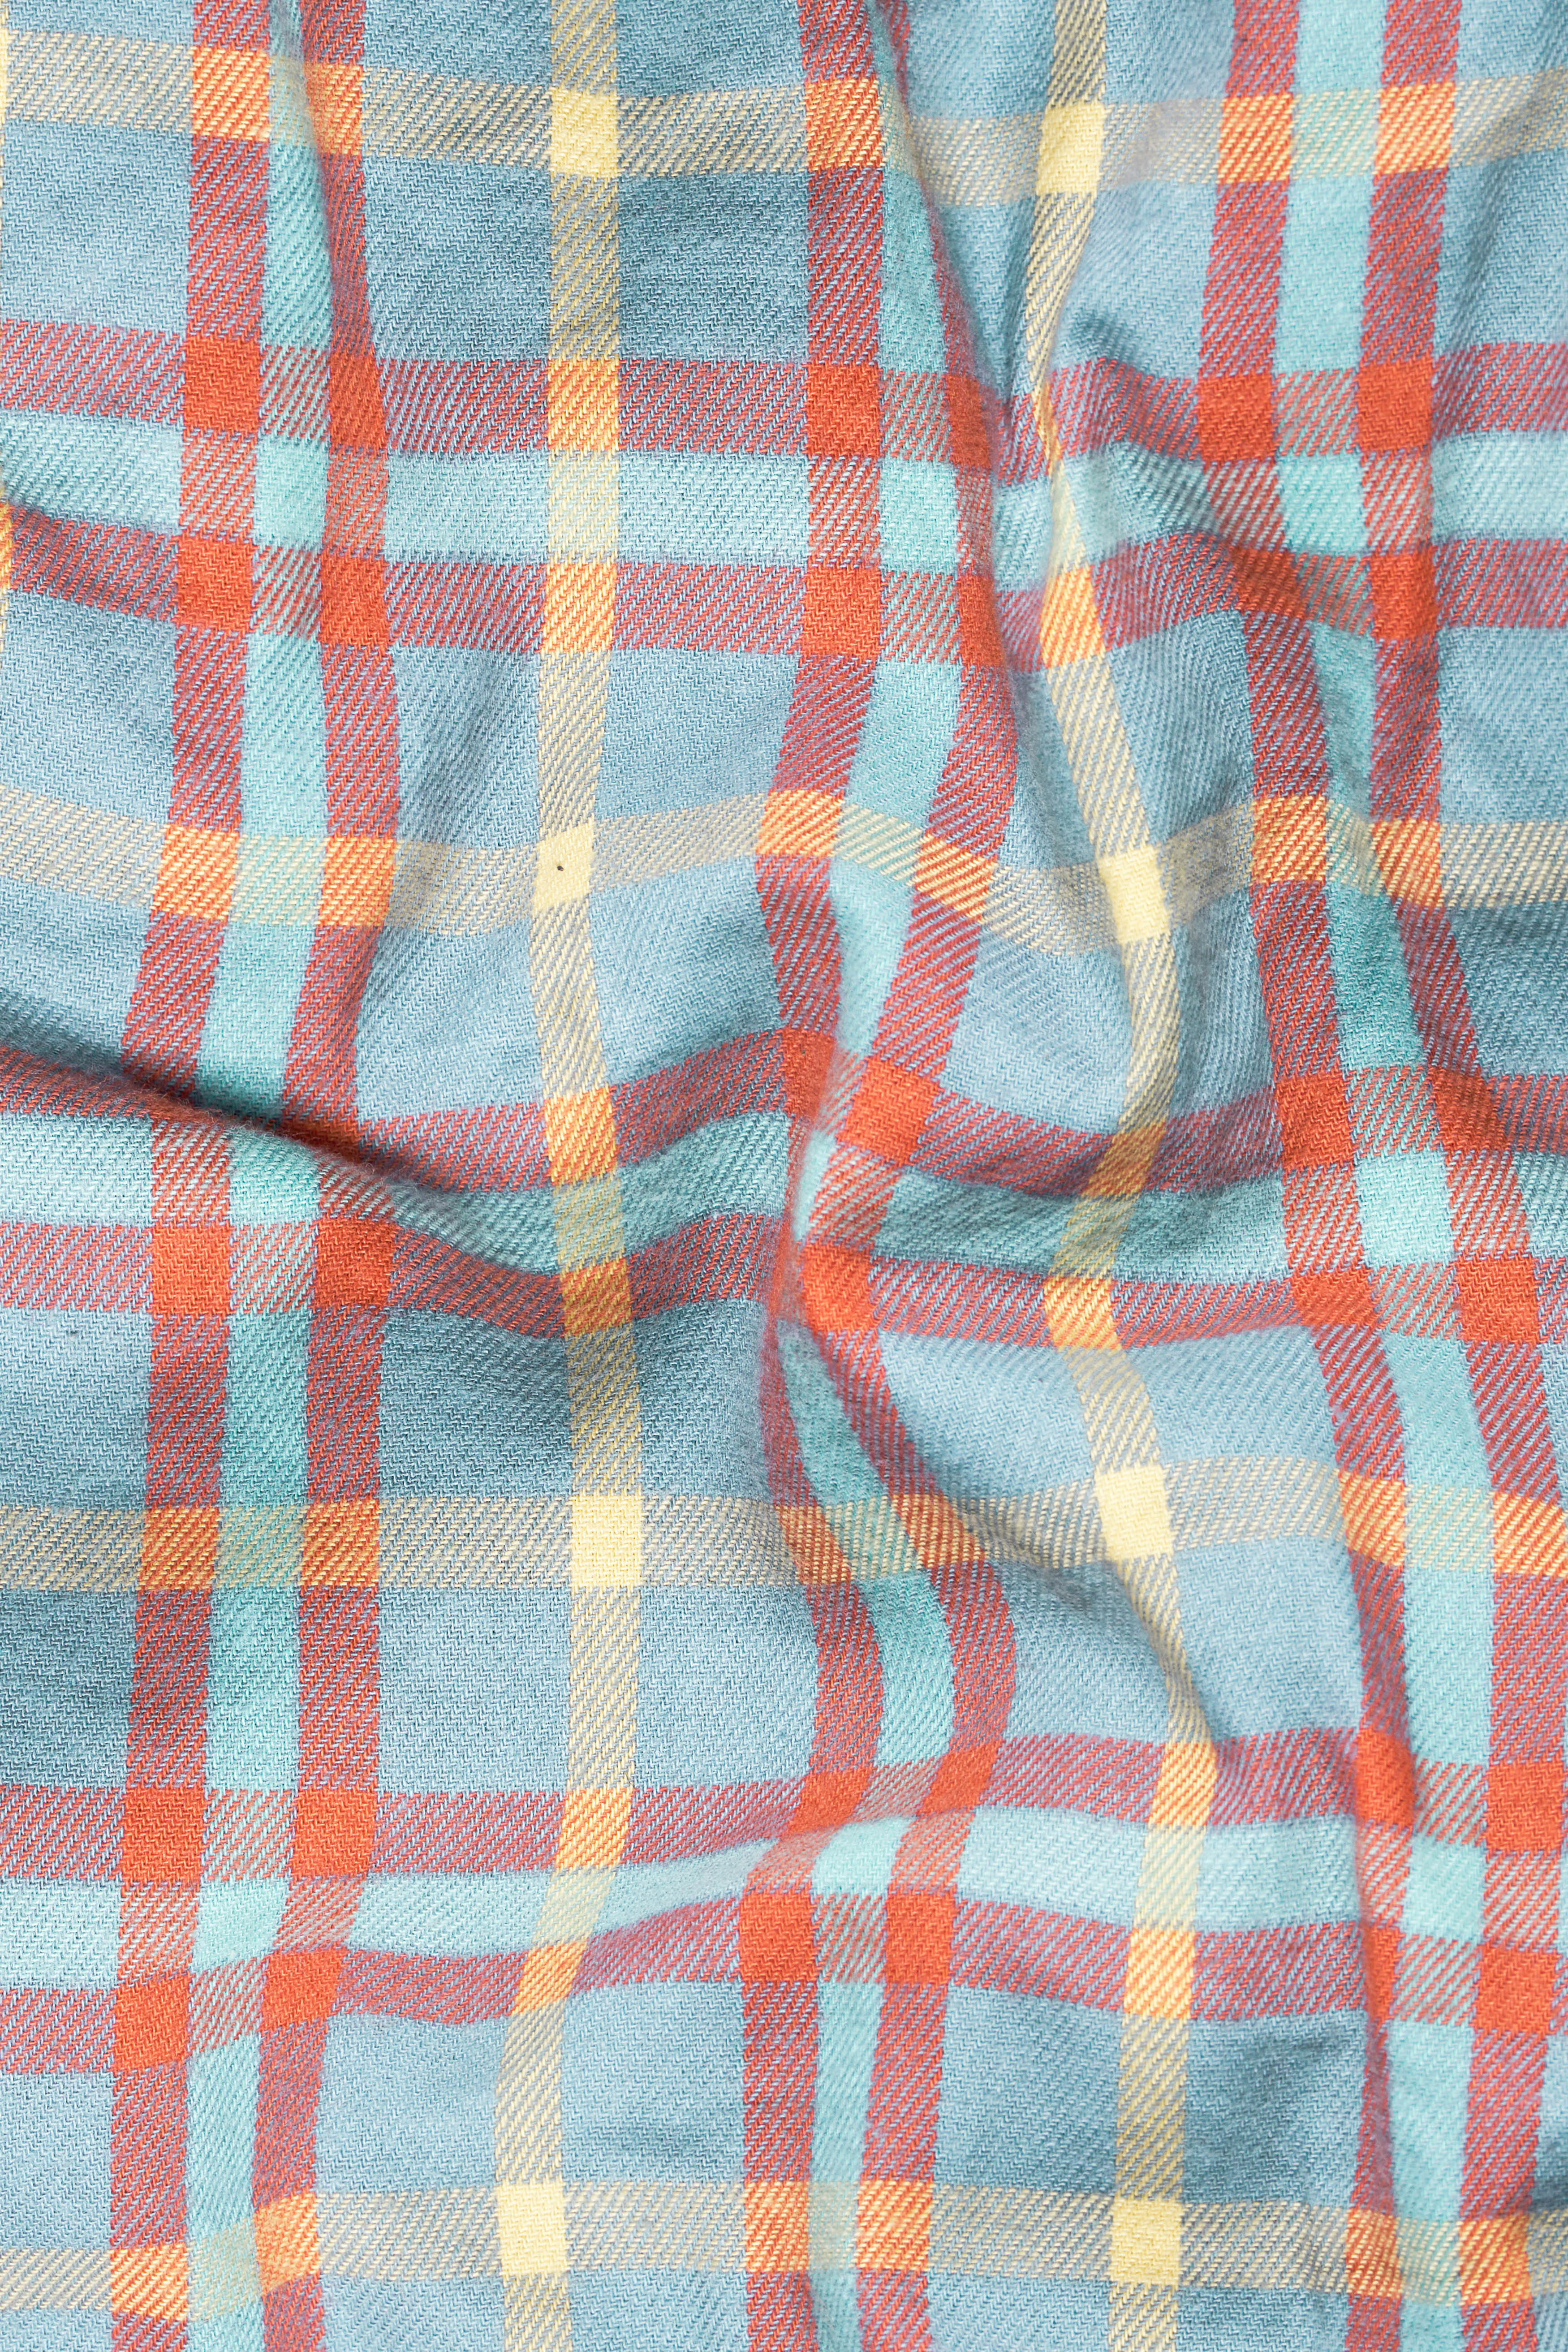 Northern Blue with Jasmine Yellow and Cadmium Orange Checkered Flannel Shirt 10301-38, 10301-H-38, 10301-39, 10301-H-39, 10301-40, 10301-H-40, 10301-42, 10301-H-42, 10301-44, 10301-H-44, 10301-46, 10301-H-46, 10301-48, 10301-H-48, 10301-50, 10301-H-50, 10301-52, 10301-H-52